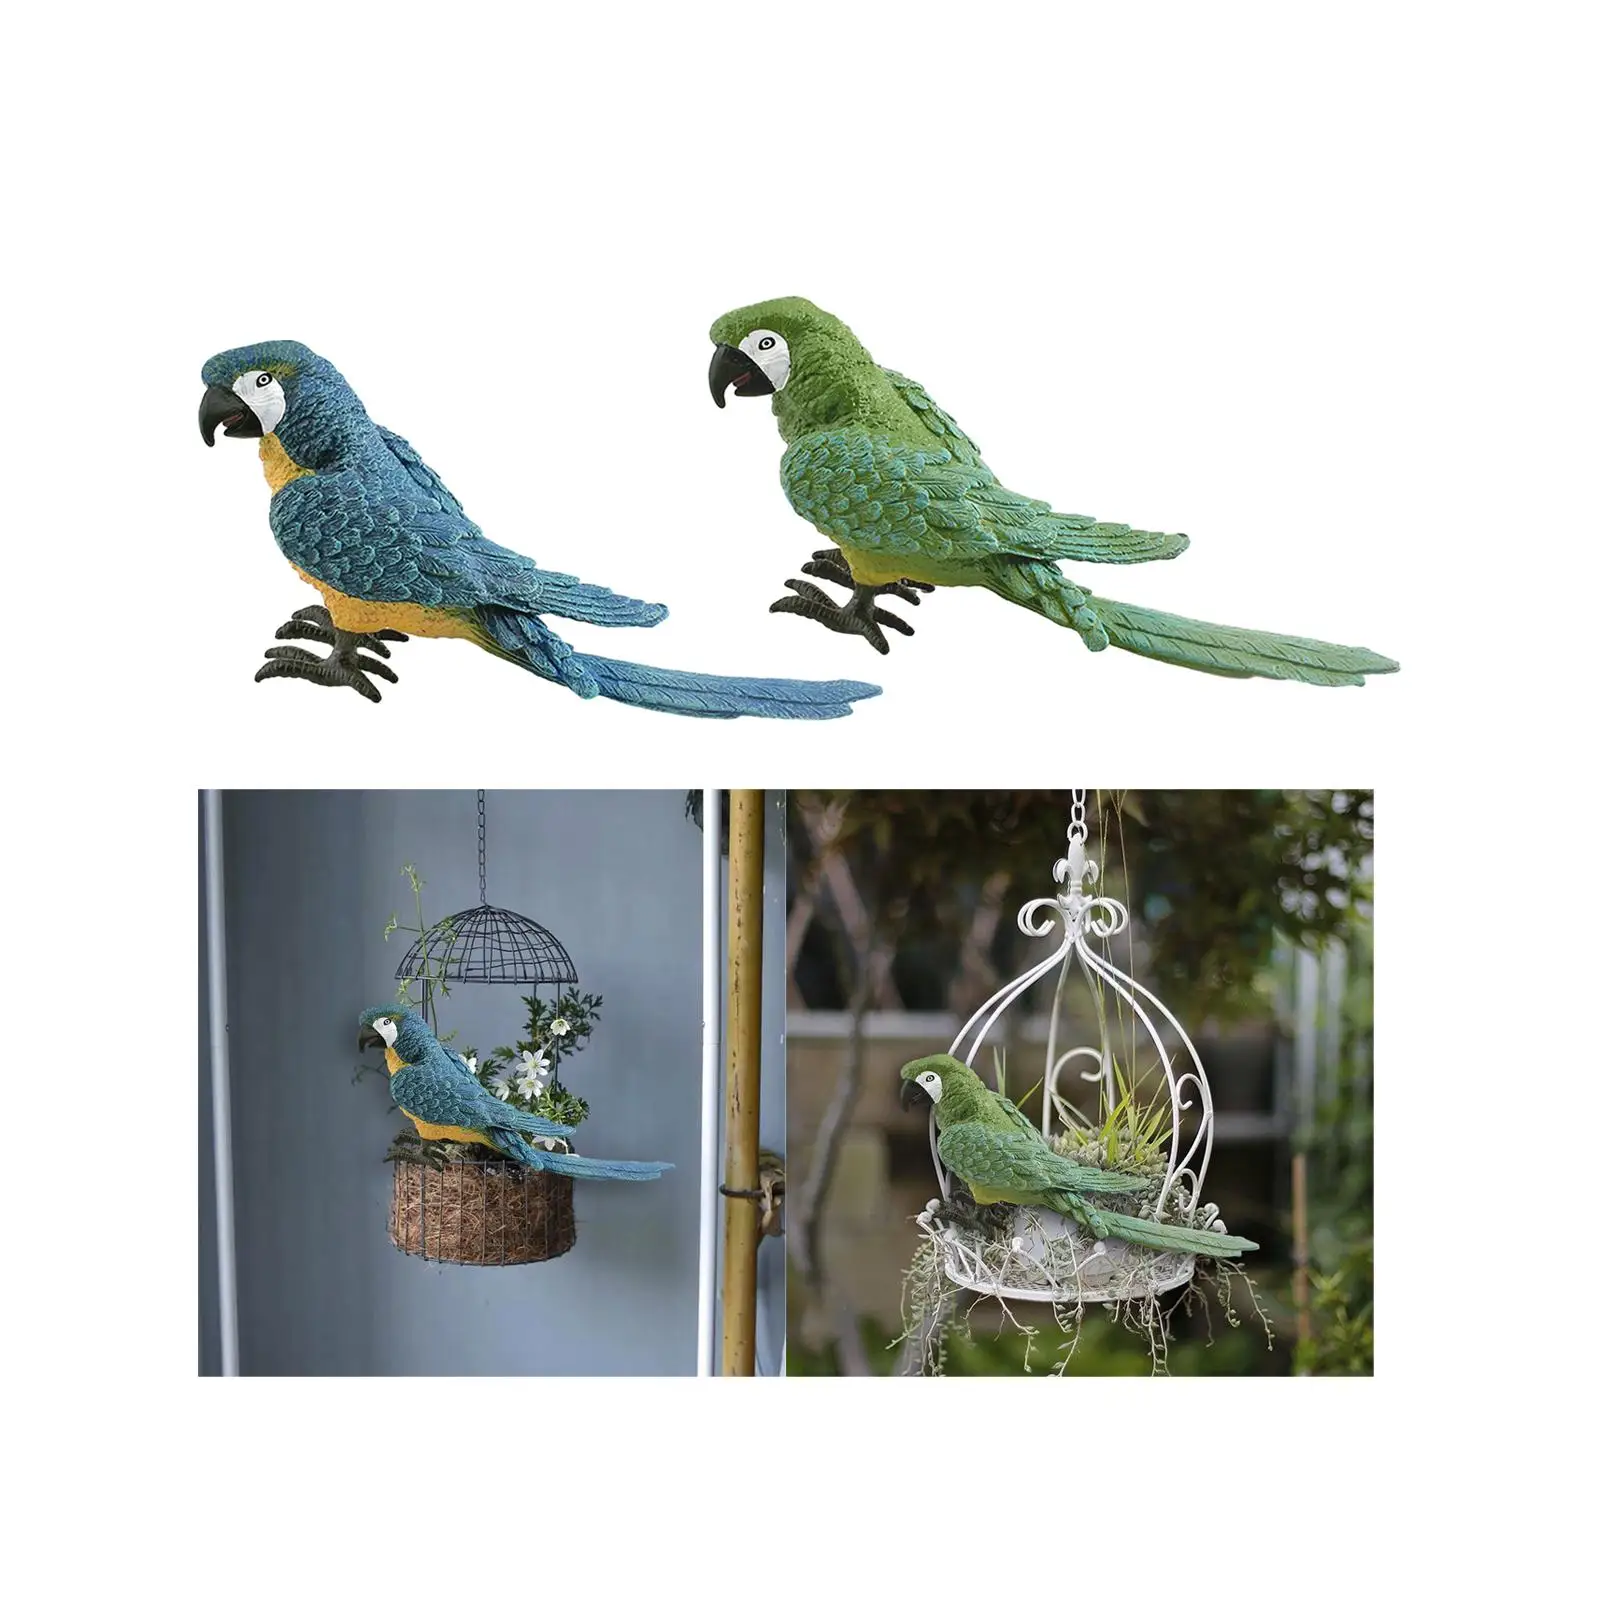 Fake Parrot Decor Model Small Parrot Figurine Birds Ornaments Artificial Parrot Model for Outdoor Home Porch Yard Patio